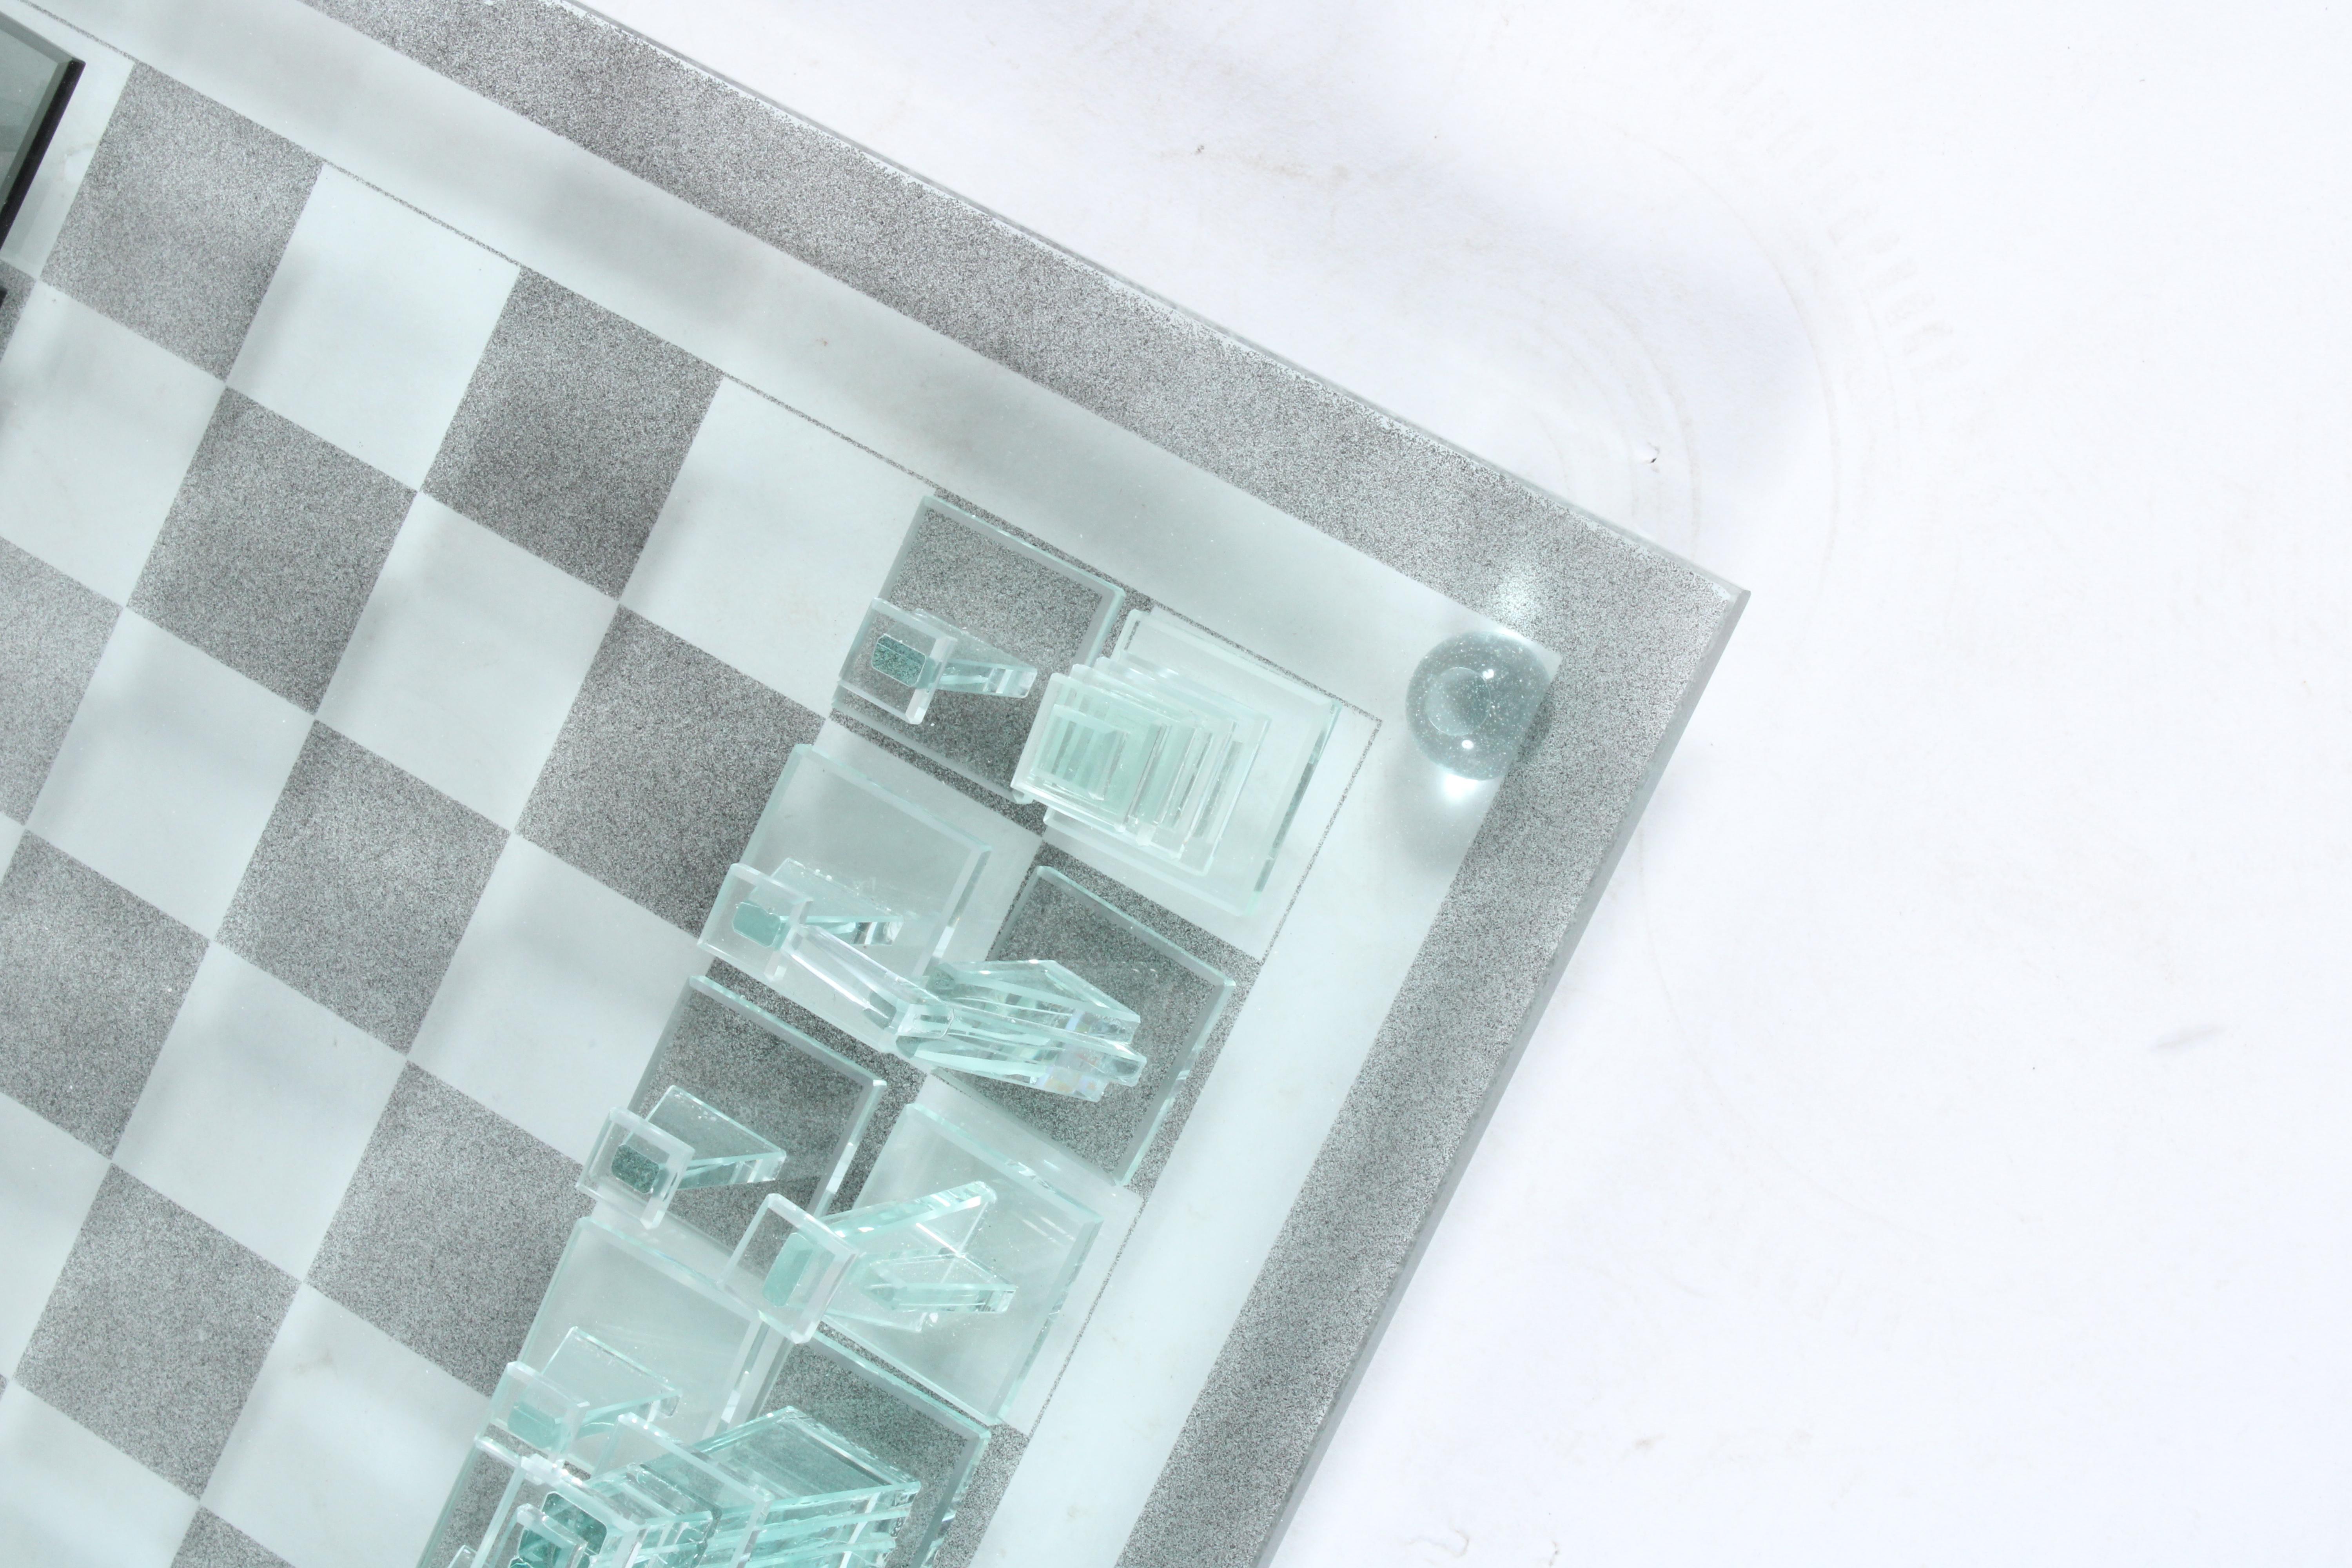 Italian Bespoke Vintage Artisan Glass Chess Set with board and pieces  *Free Shipping